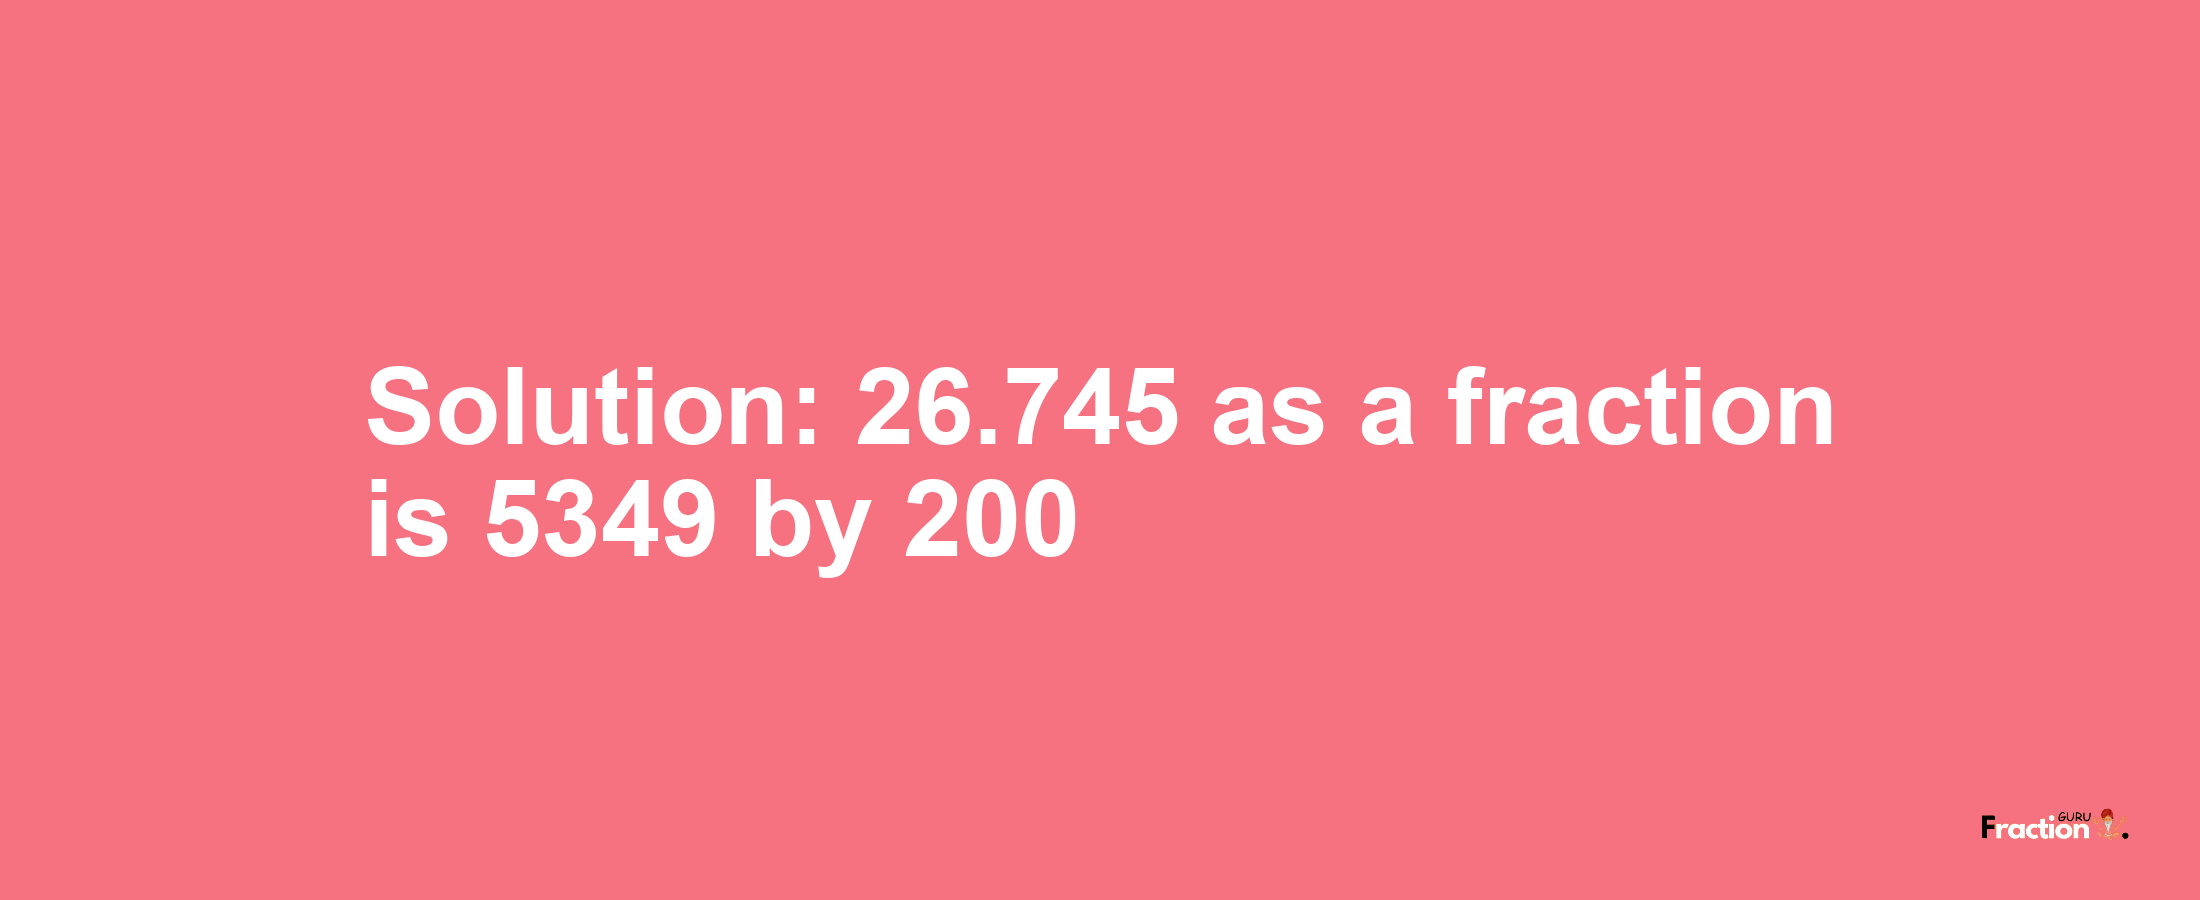 Solution:26.745 as a fraction is 5349/200